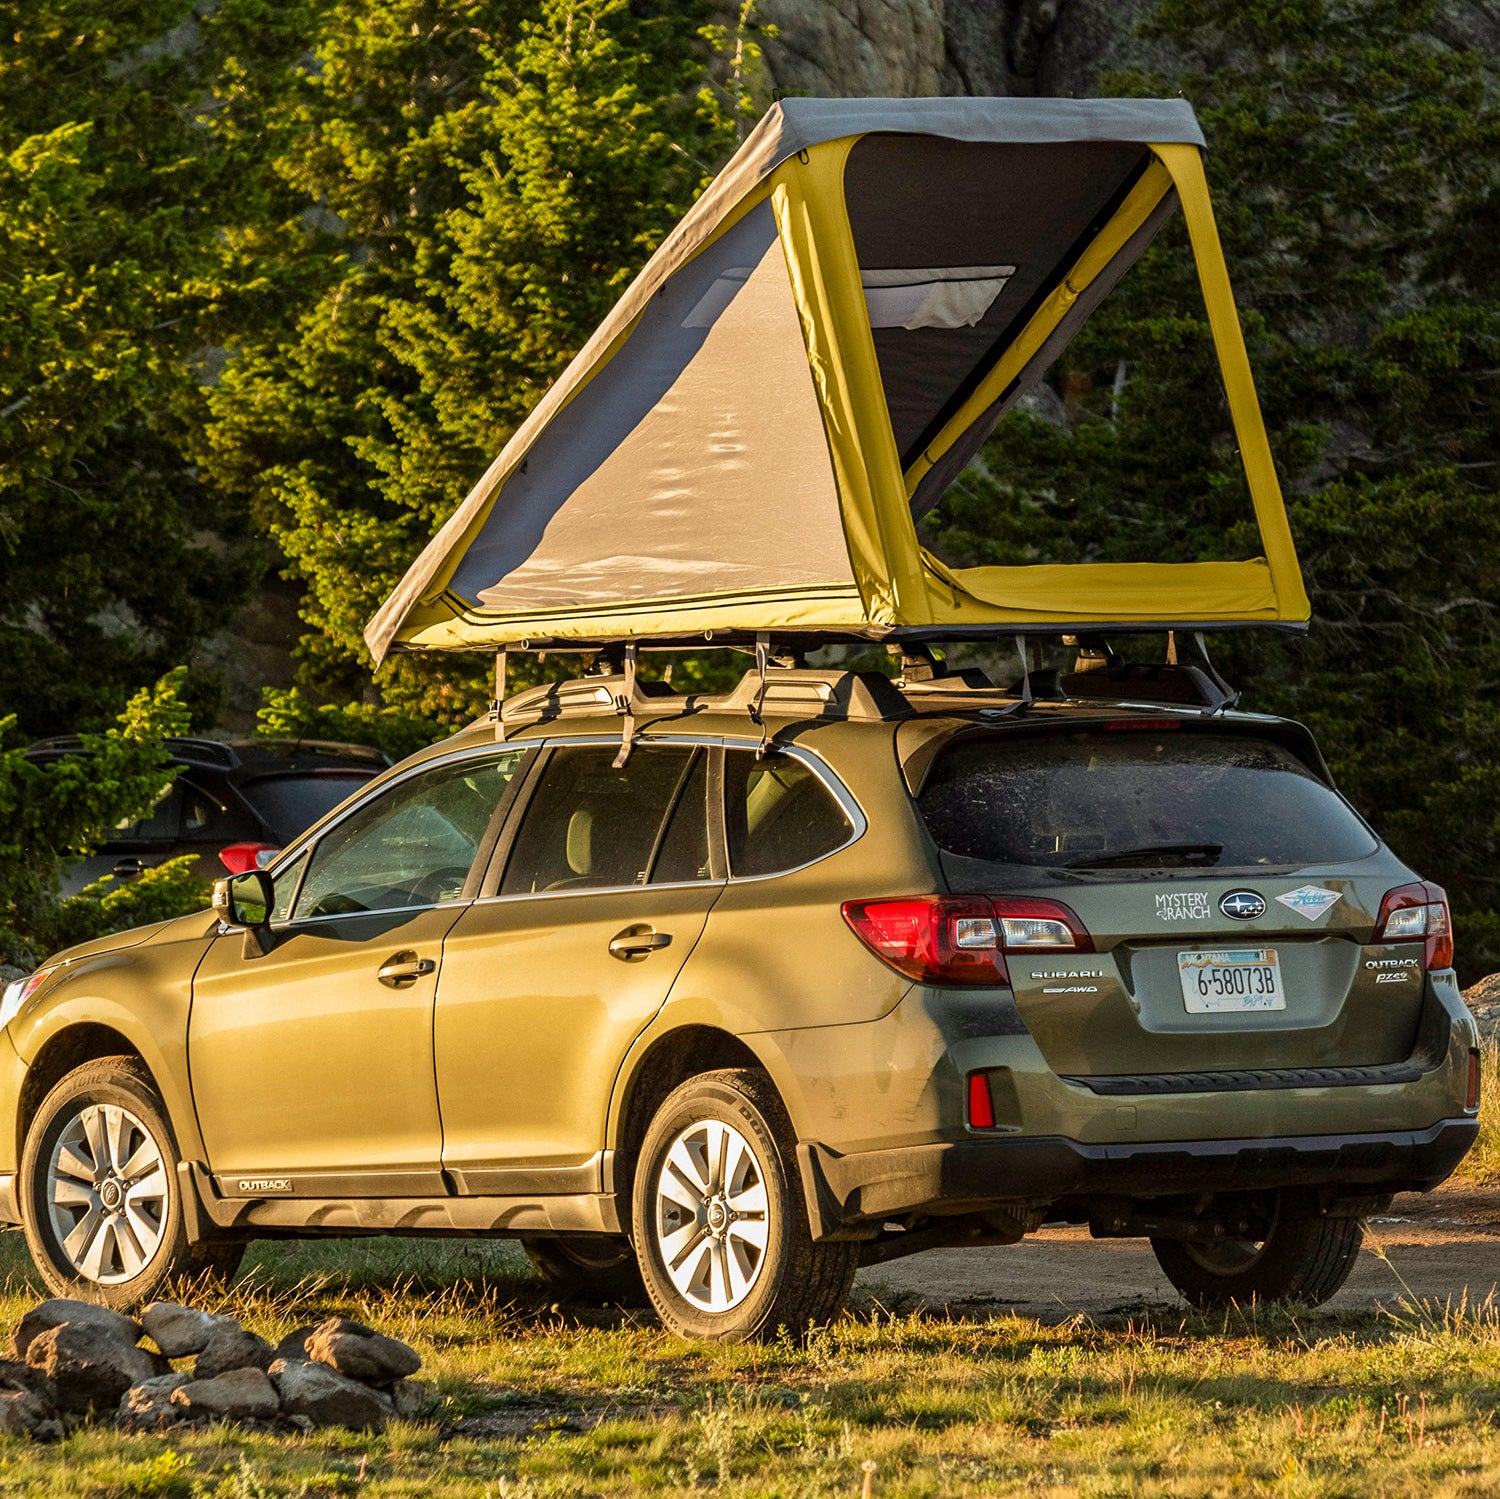 langs Onvergetelijk Auto Hey Look, a Rooftop Tent That Won't Ruin Your Car - Outside Online